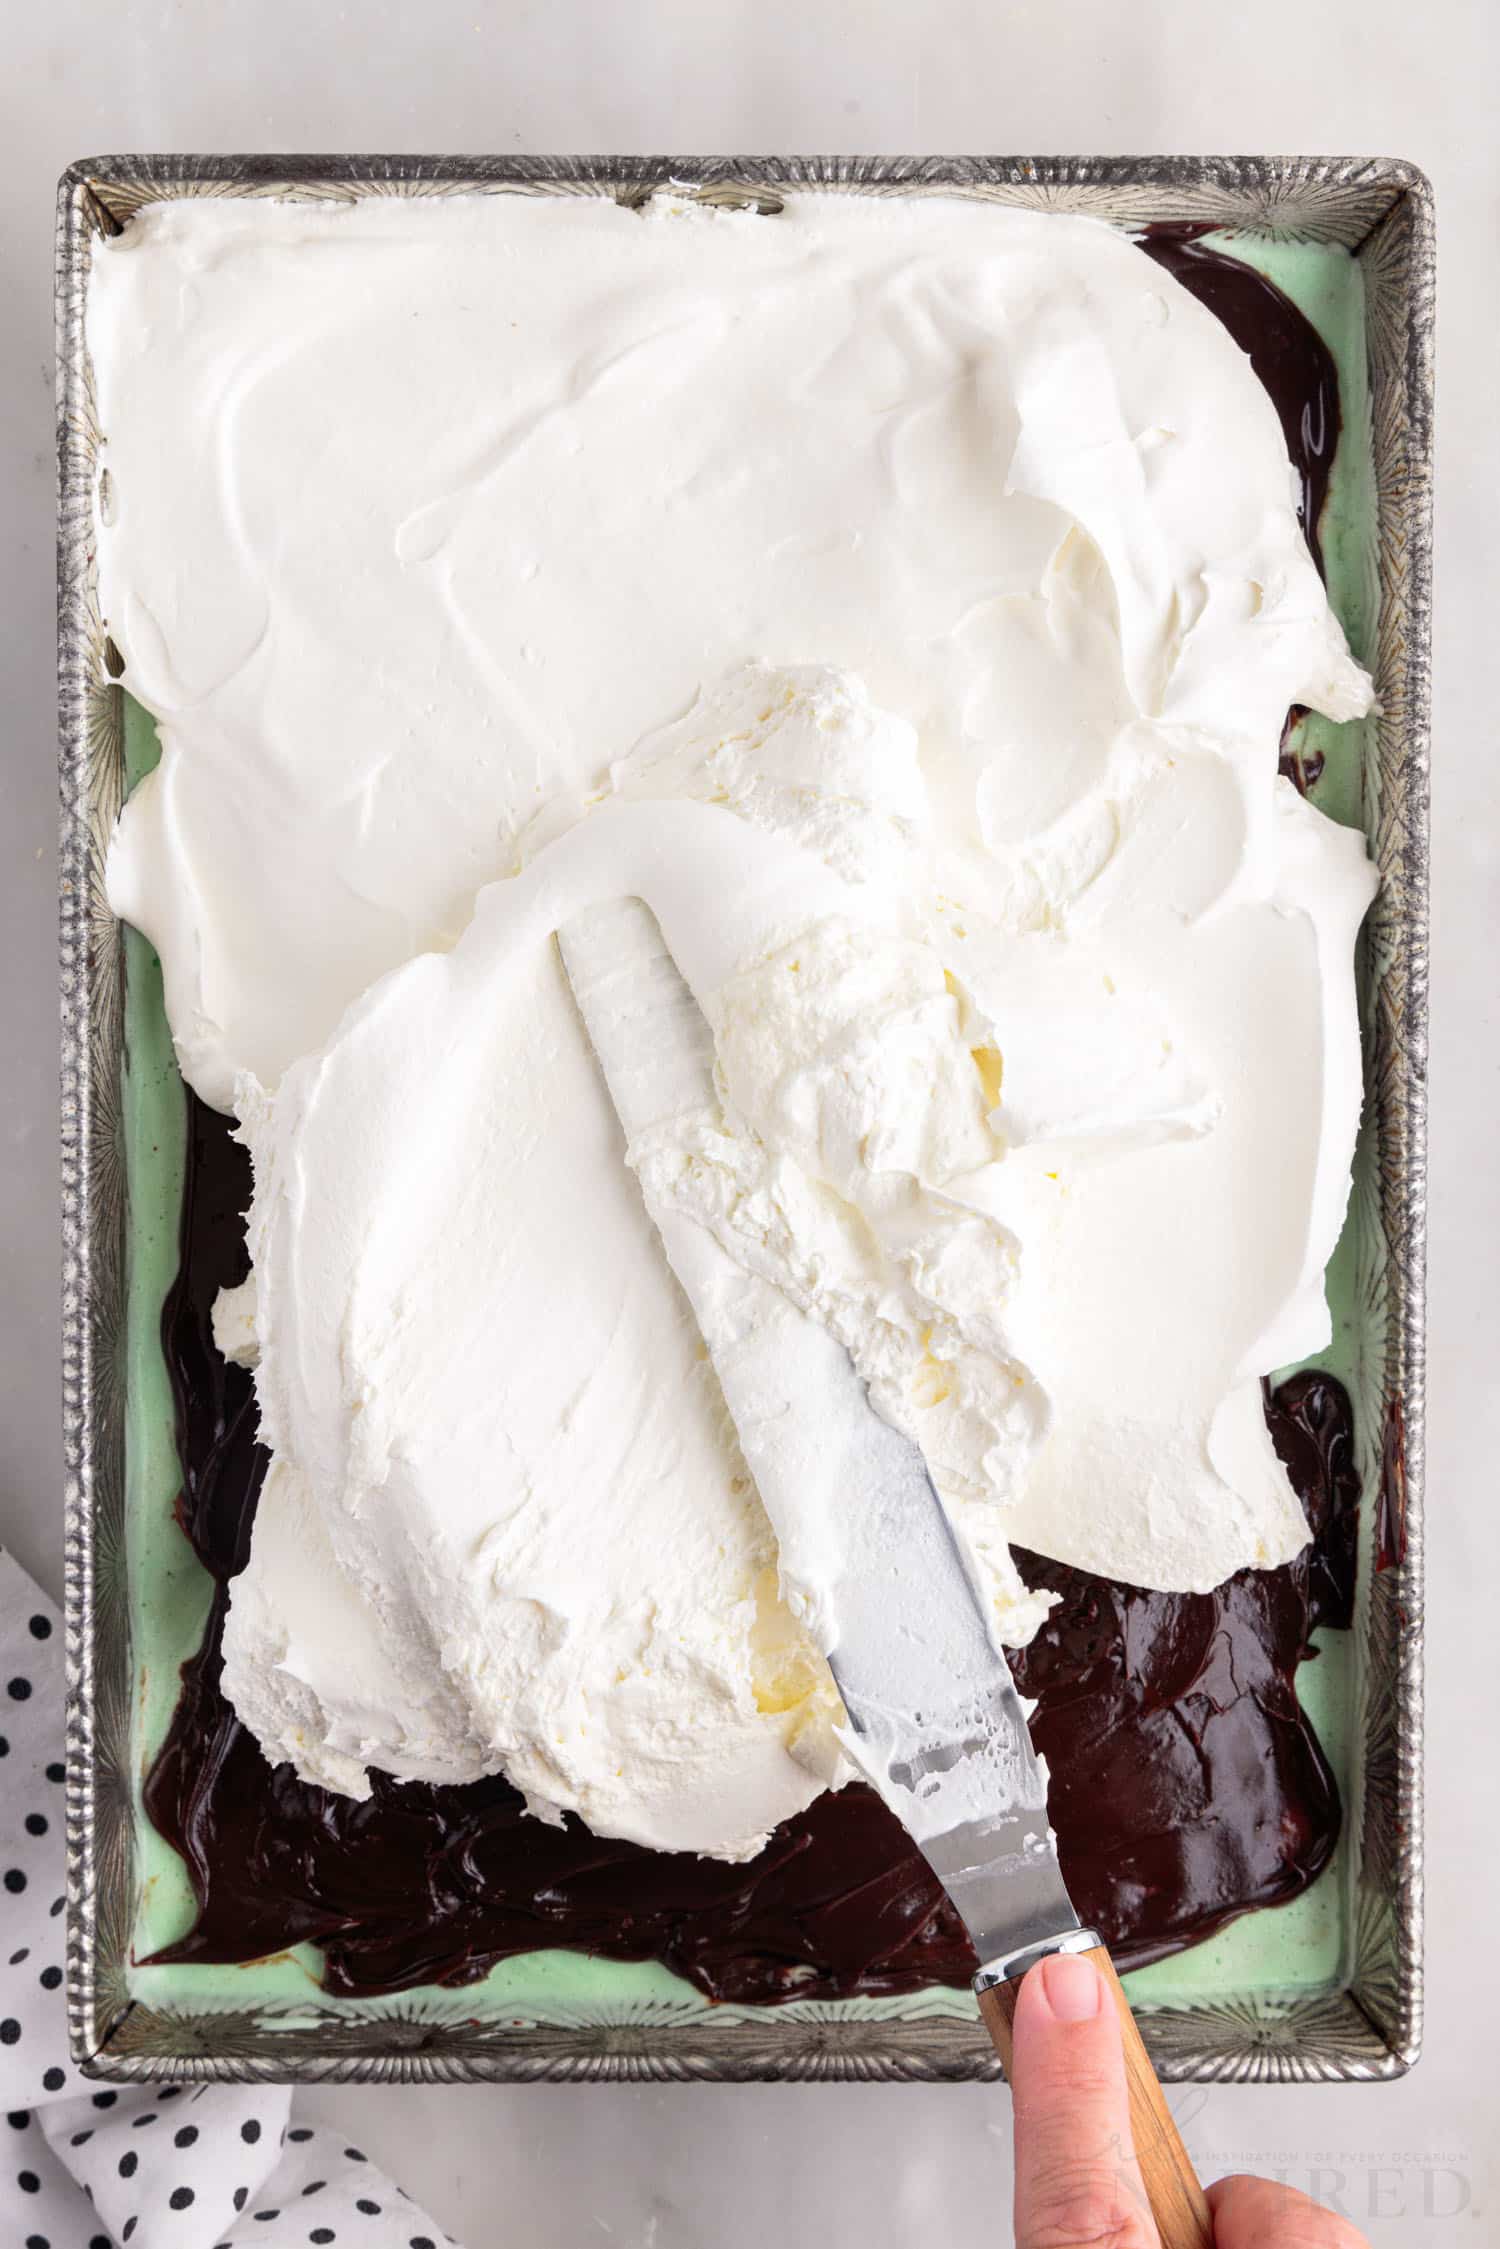 cool whip spread onto hot fudge layer